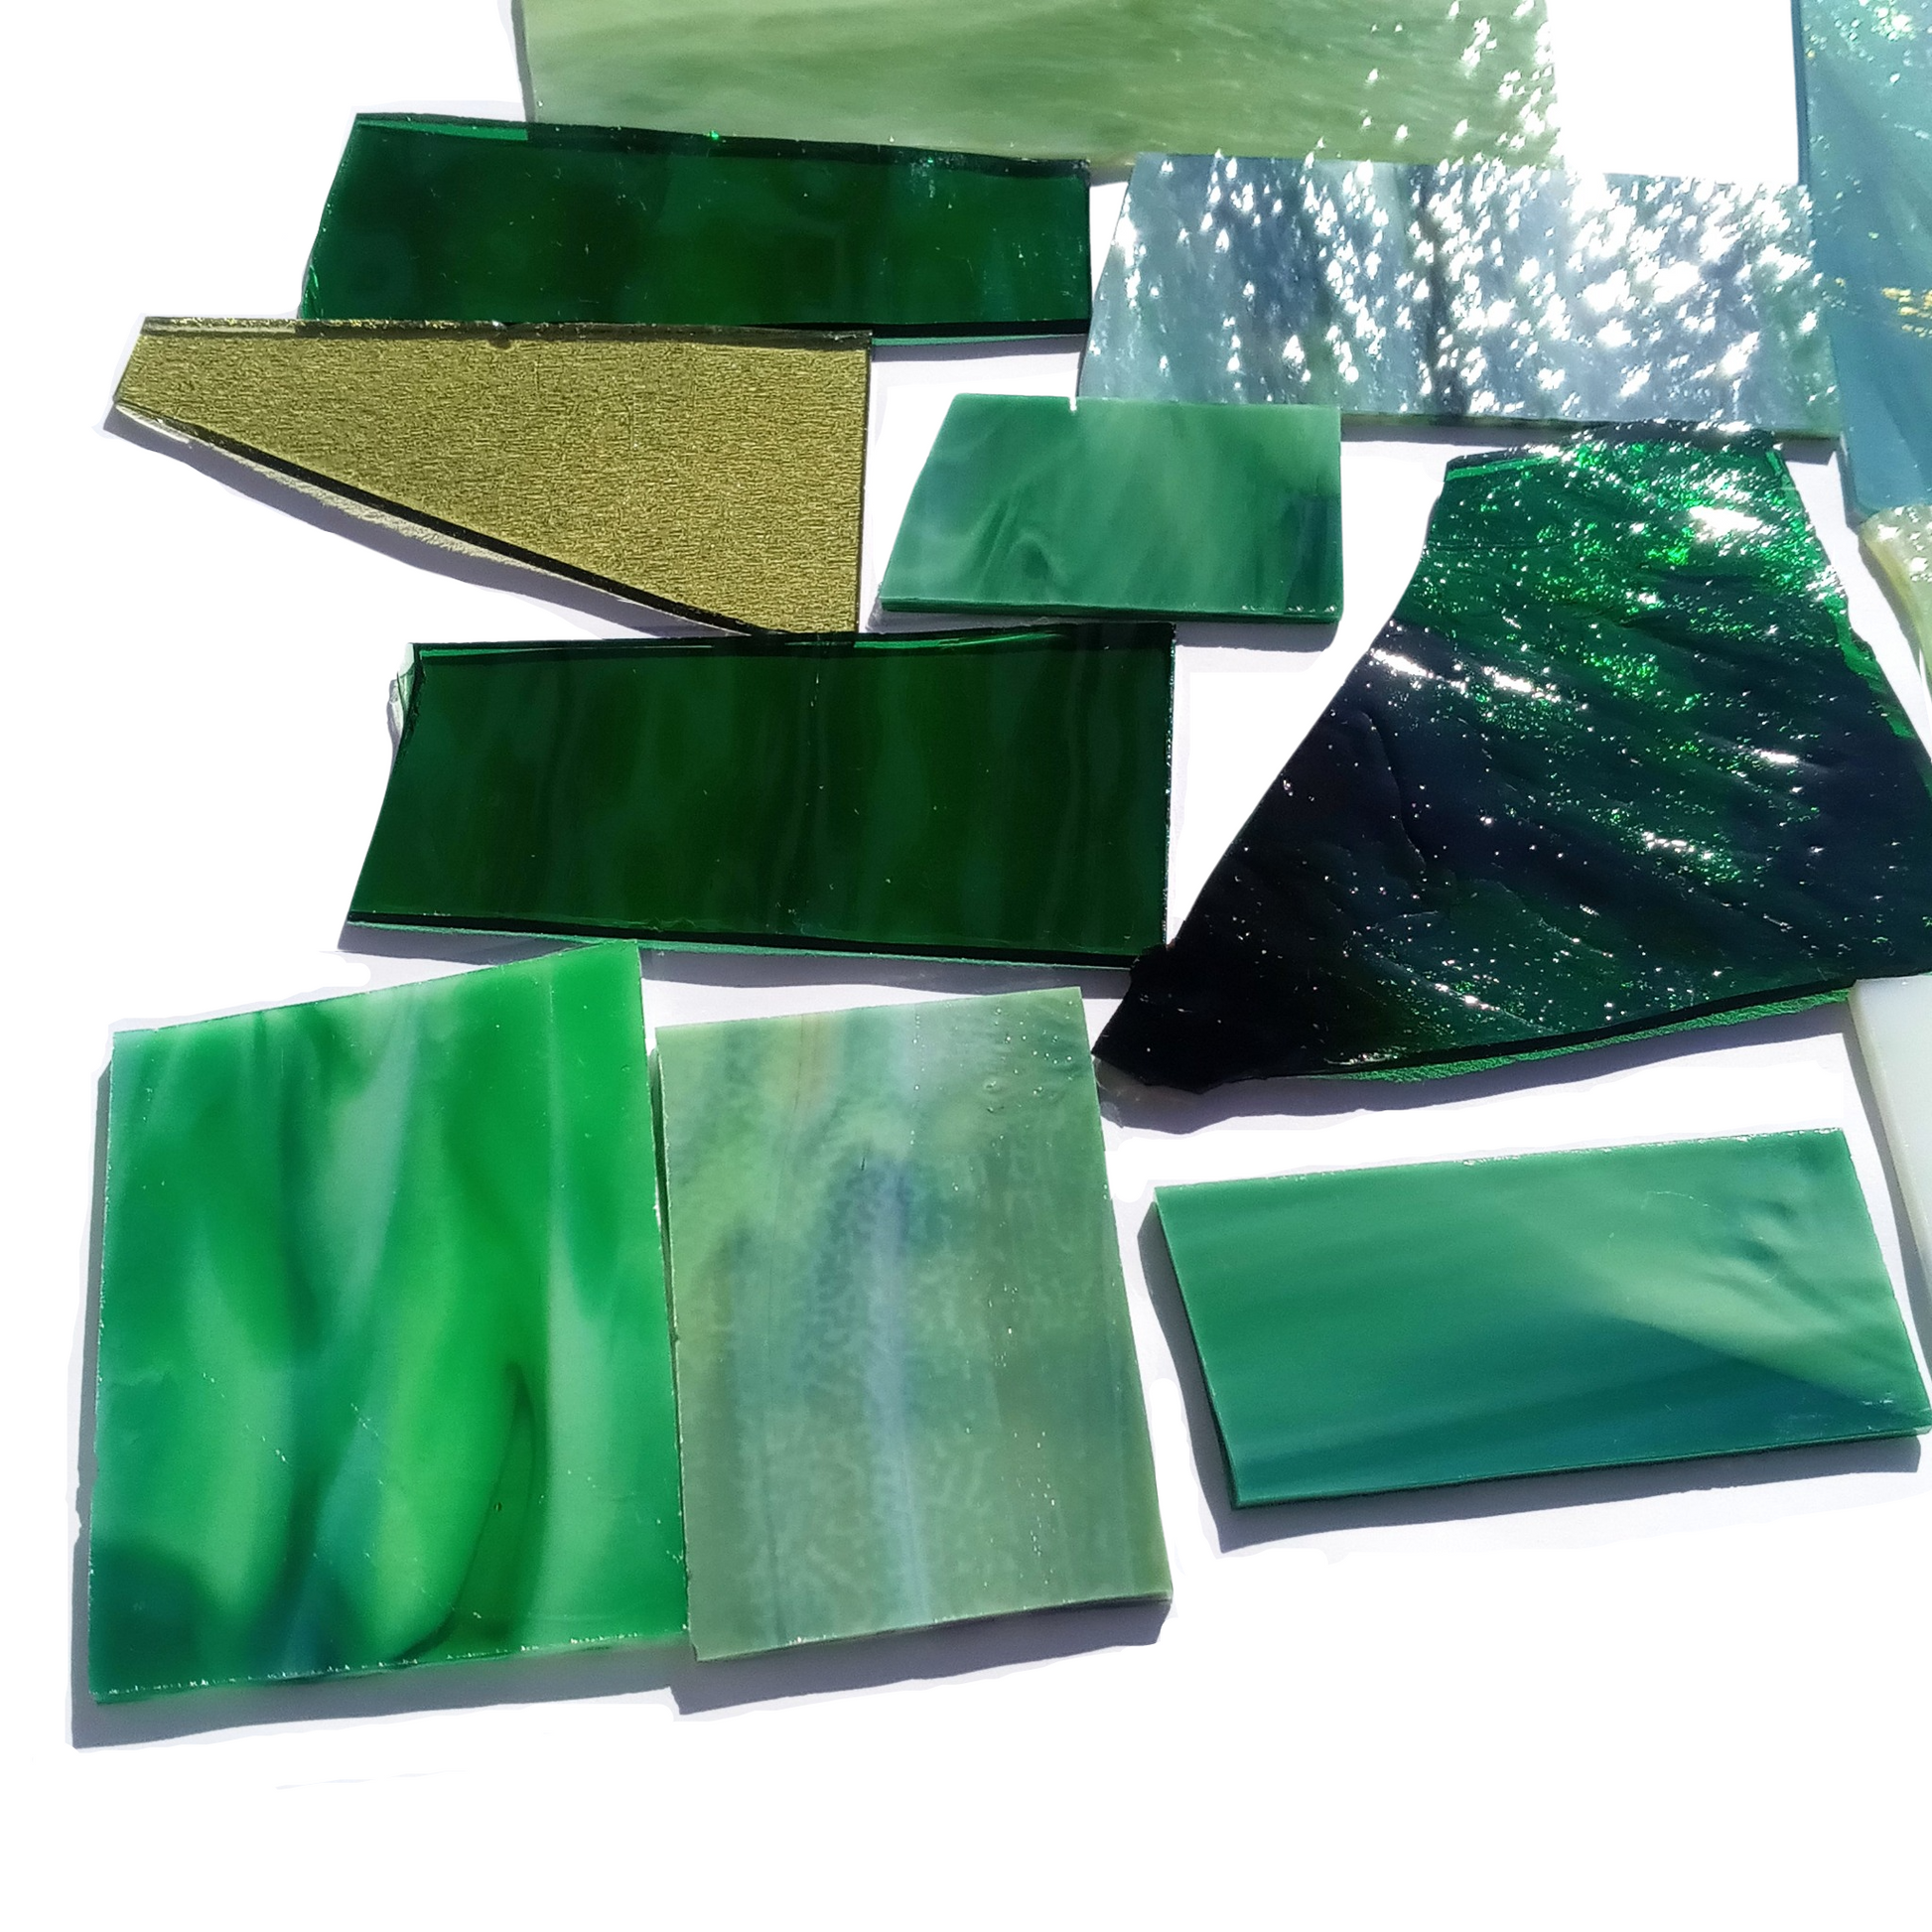 Green Stained Glass Scraps, Curated 1 lb Package of Reclaimed Shop Scrap Glass in Shades of Green